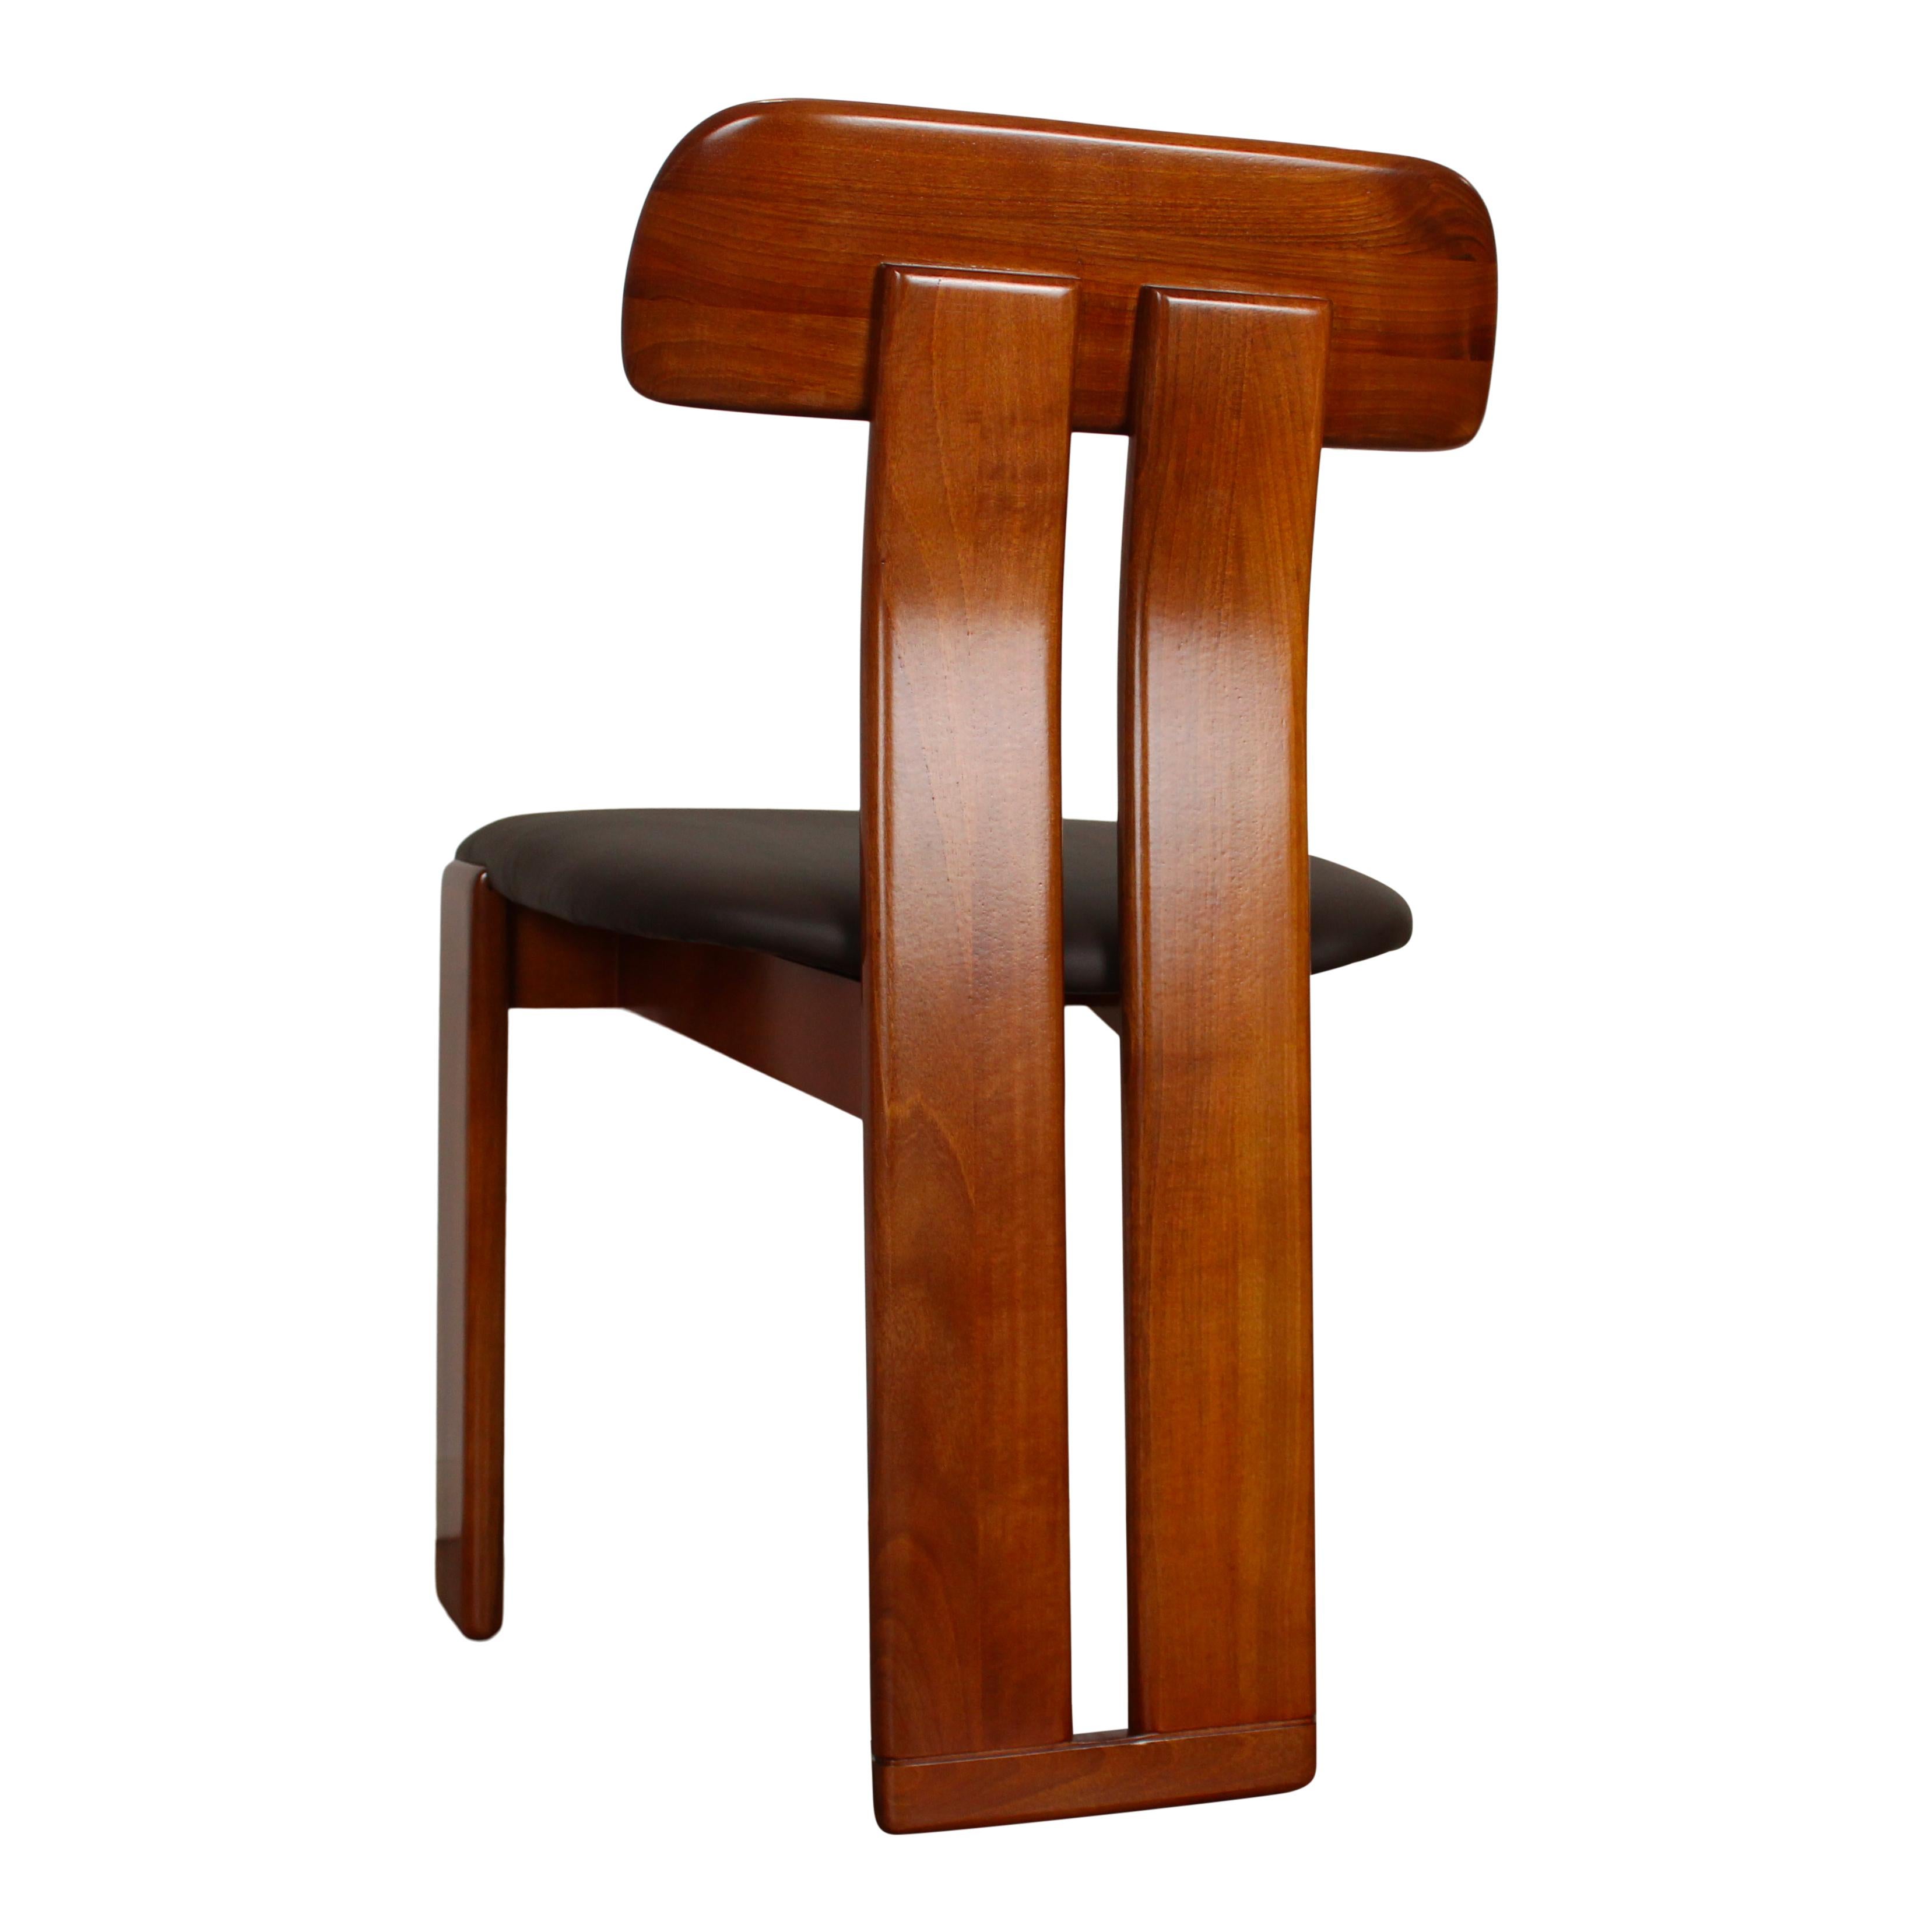 Mario Marenco Walnut Sapporo Dining Chairs for Mobilgirgi, 1970s, Set of 8 For Sale 7